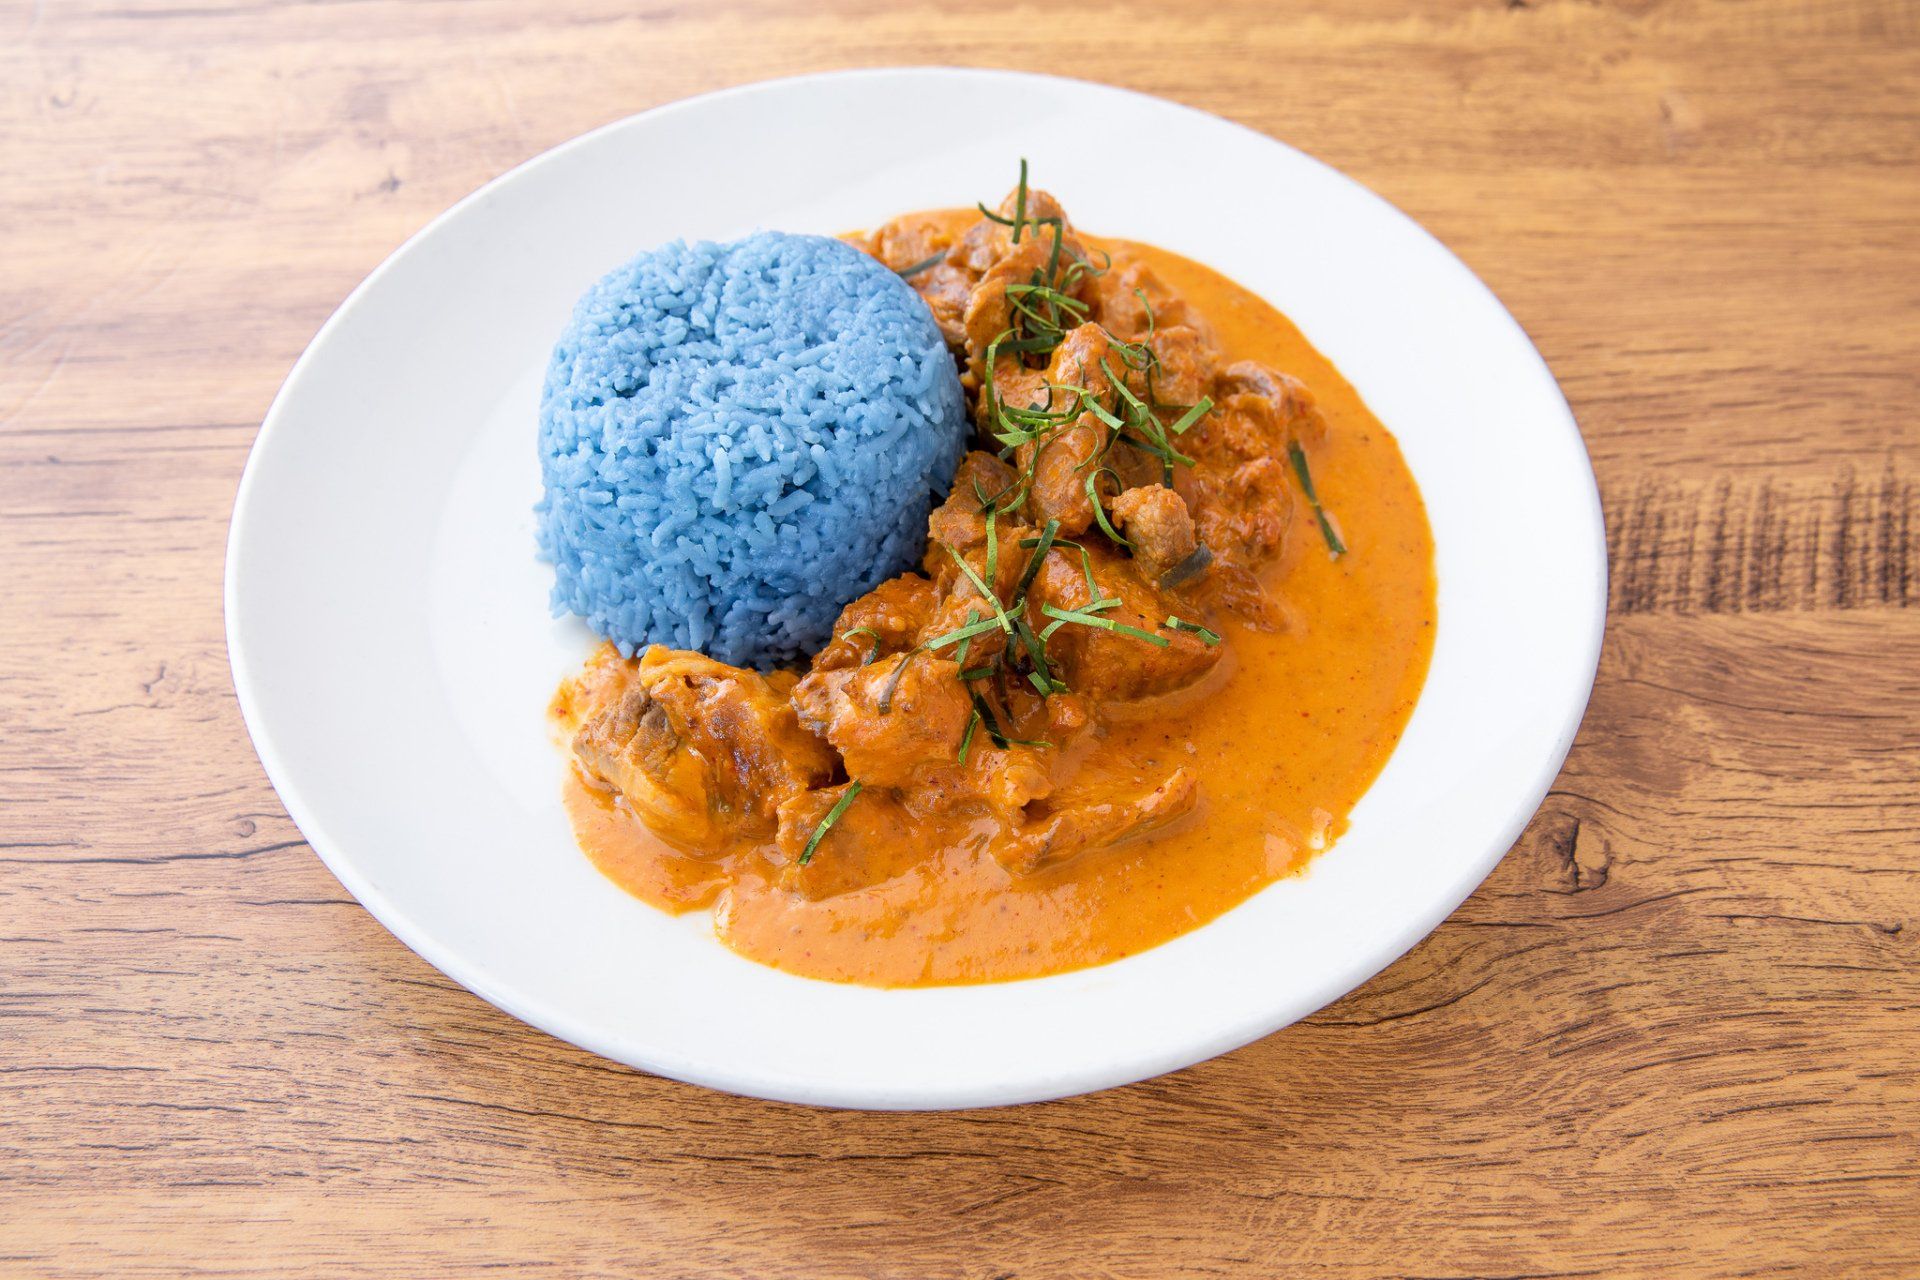 Blue rice and beef curry plate